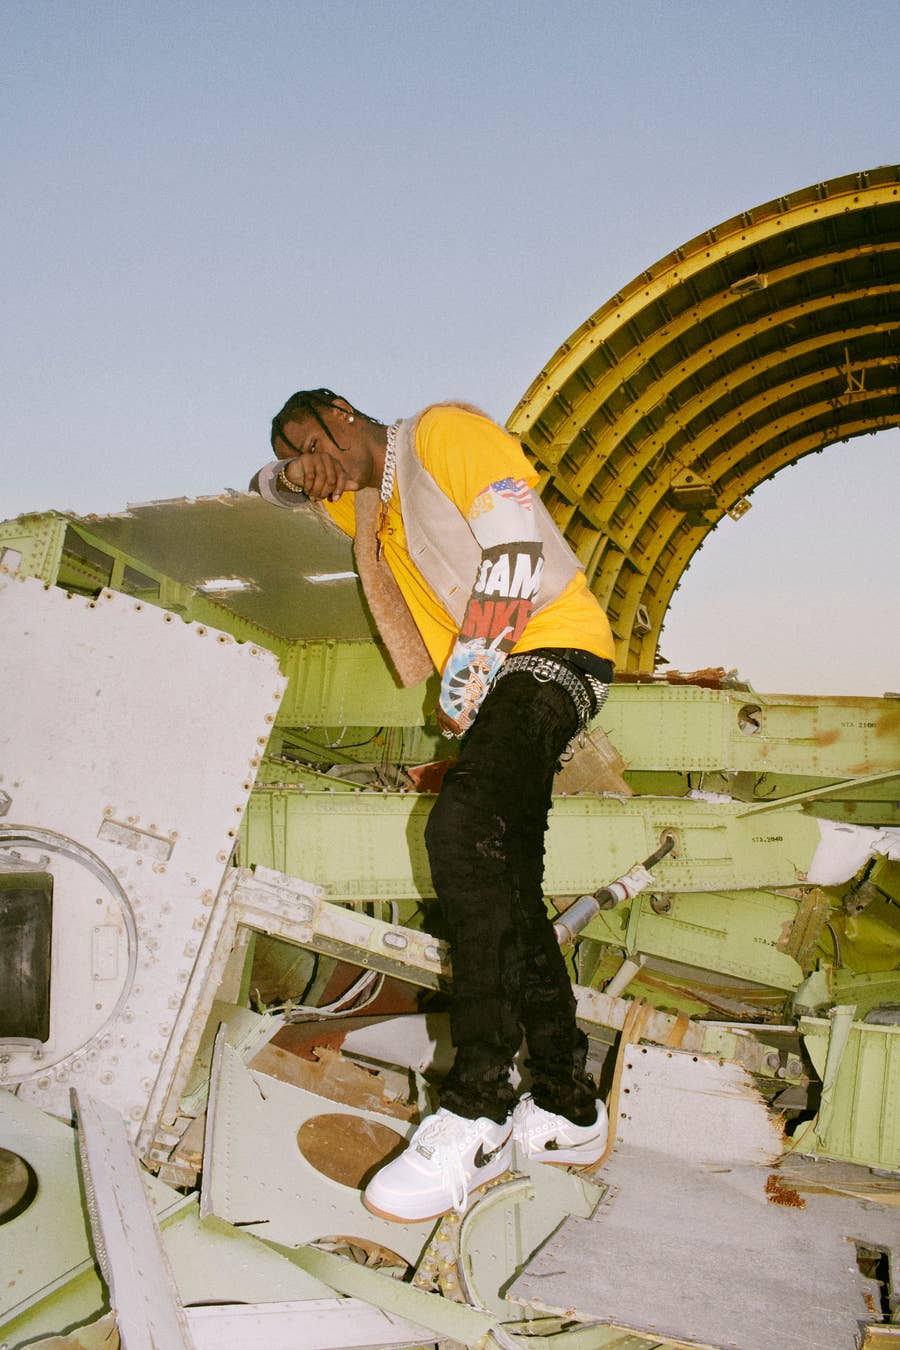 Complex Sneakers on X: Travis Scott with the graffiti tagged Louis Vuitton  x Nike Air Force 1s 😤  / X